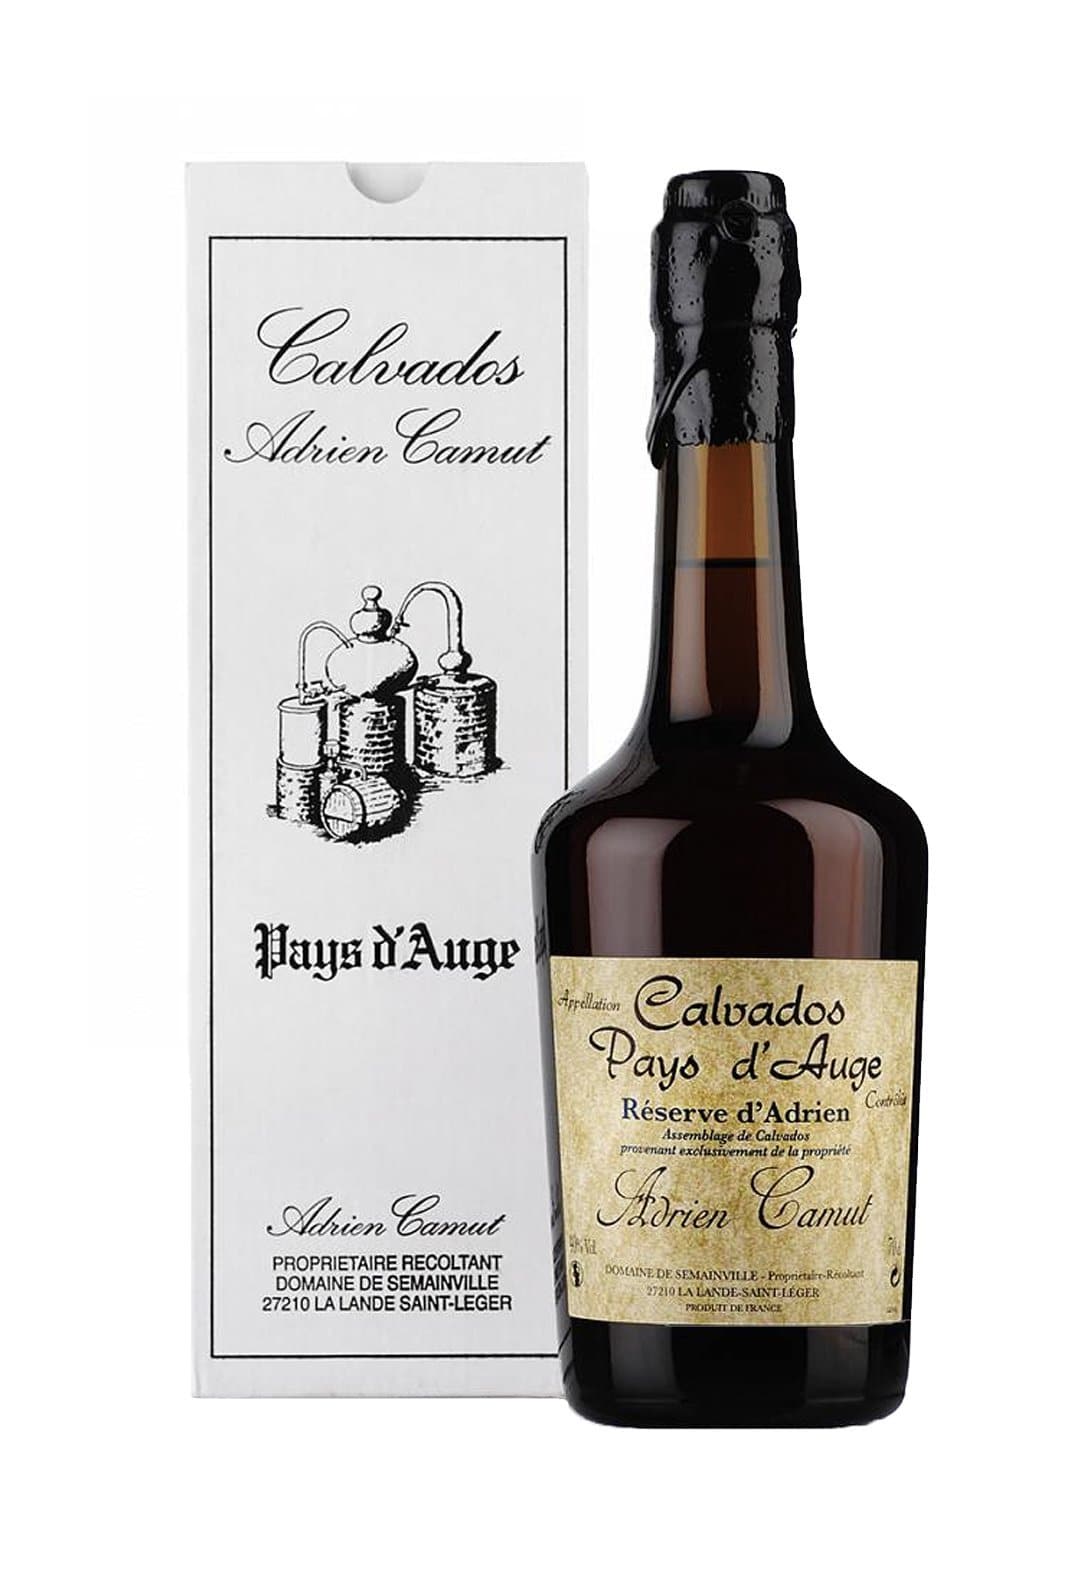 Adrien Camut Calvados 'Reserve d'Adrien' 35-40 years Pays D'Auge 40% 700ml | Brandy | Shop online at Spirits of France